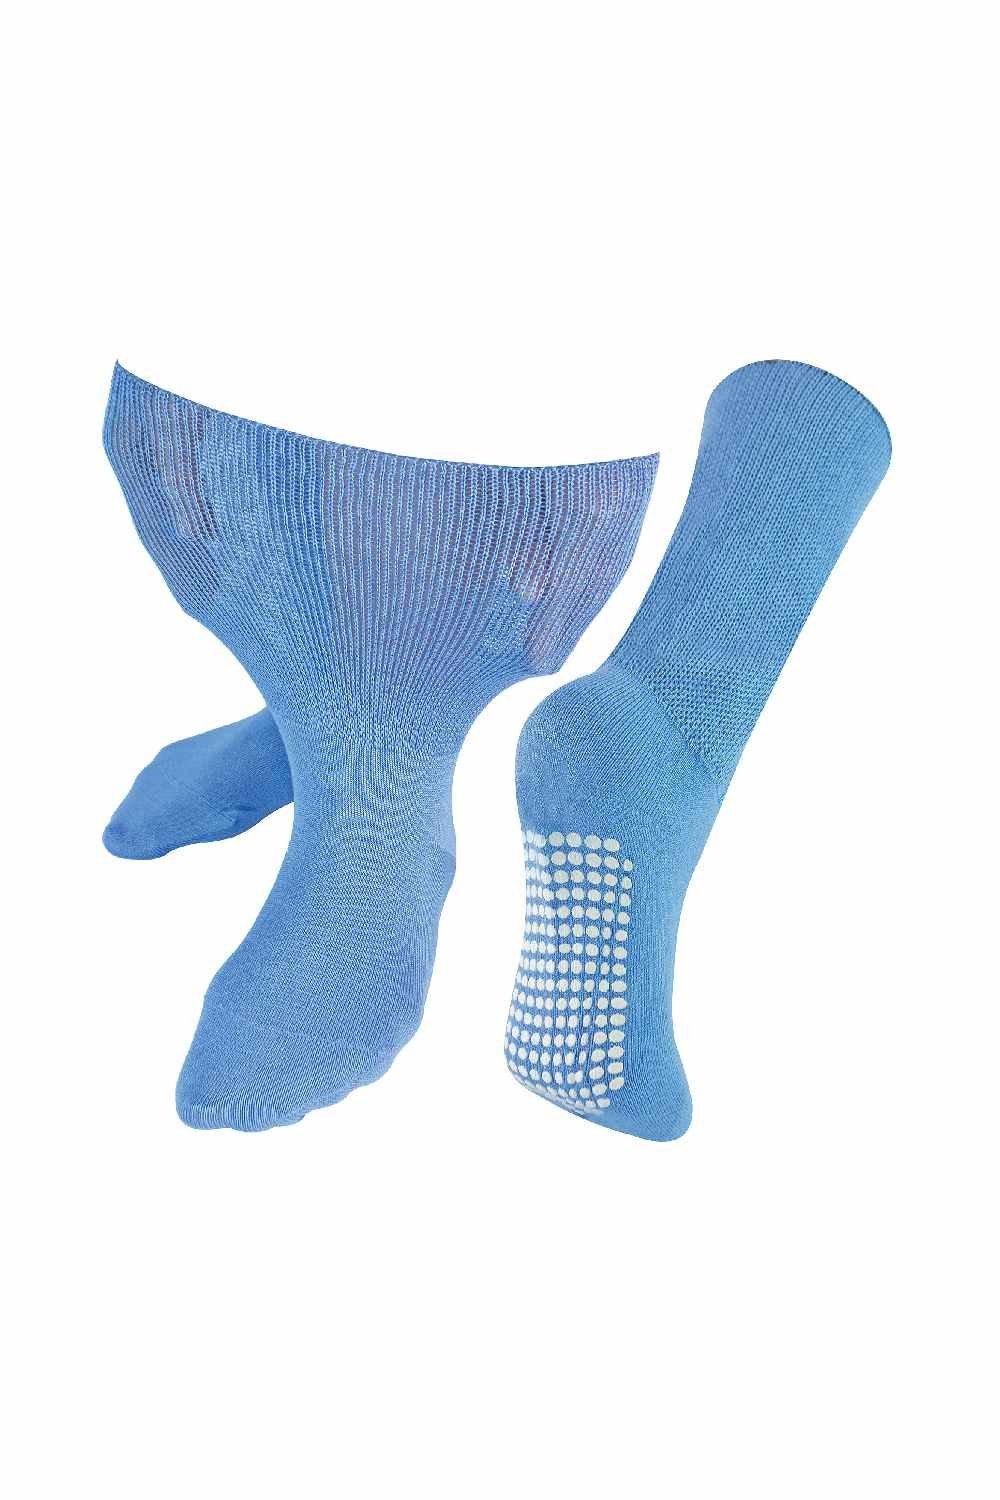 Extra Wide Bamboo Oedema Socks with Non Slip Grips for Swollen Legs